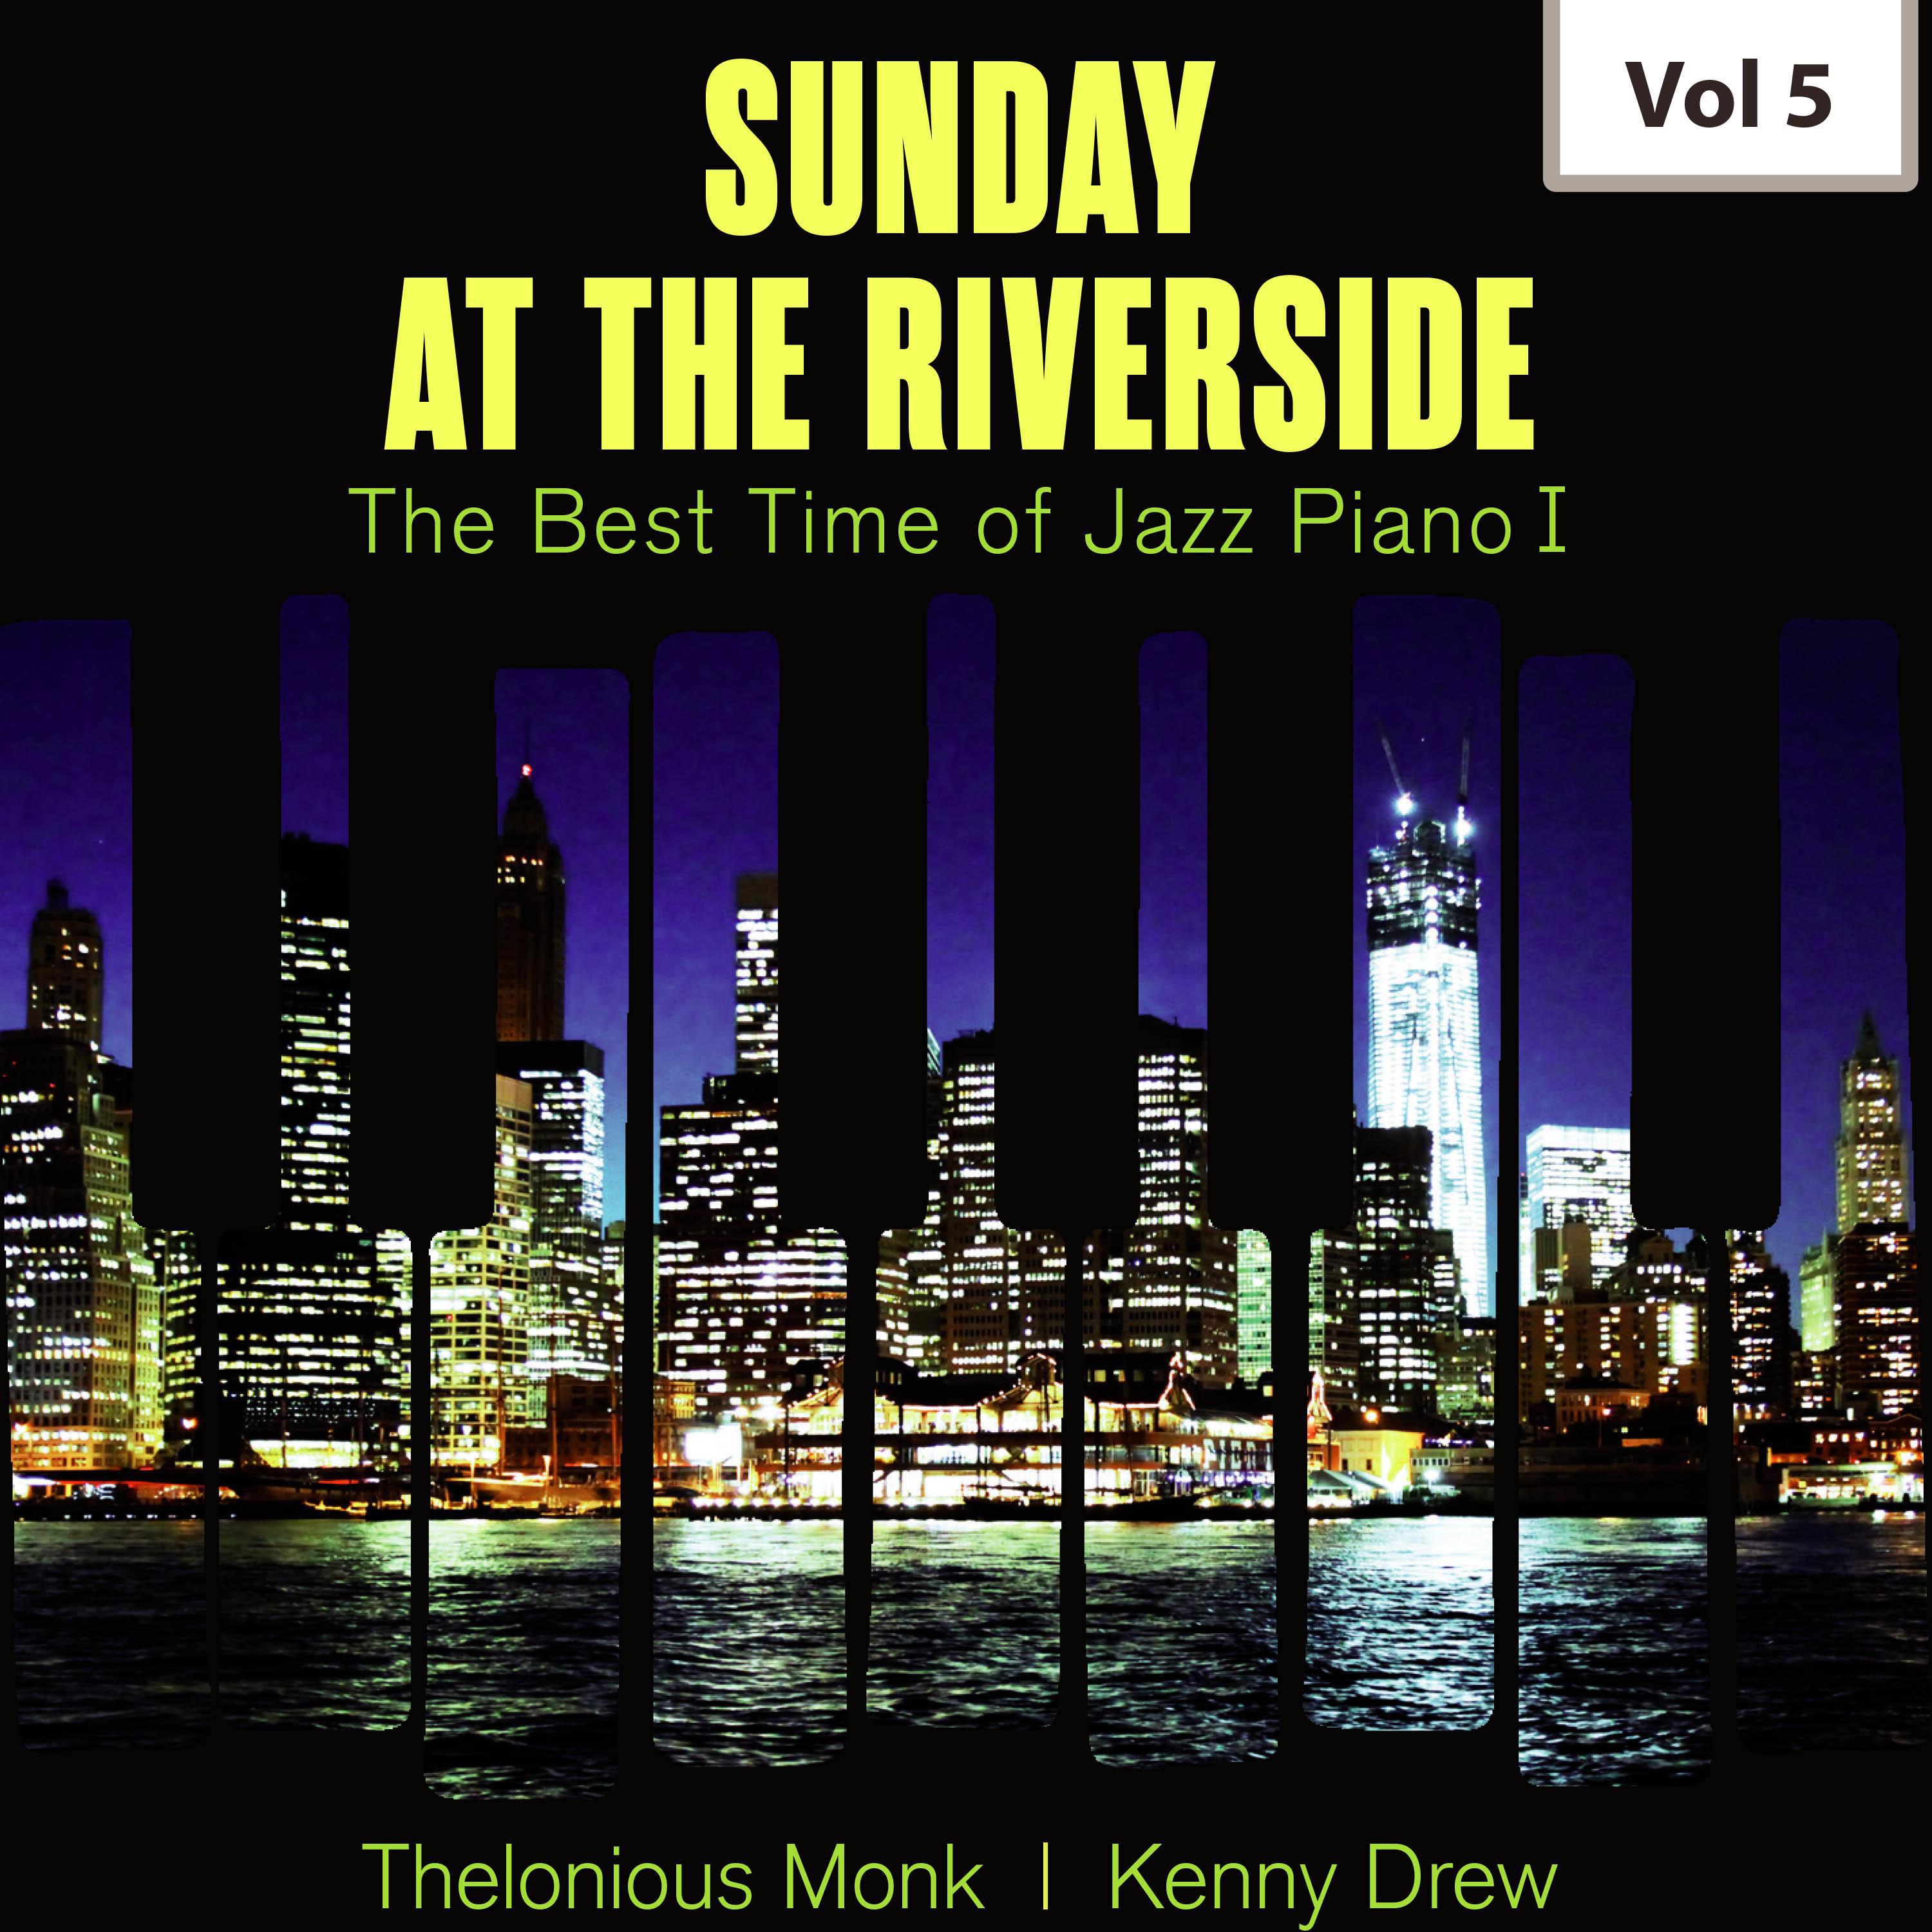 Sunday at the Riverside - The Best Time of Jazz Piano I, Vol. 5